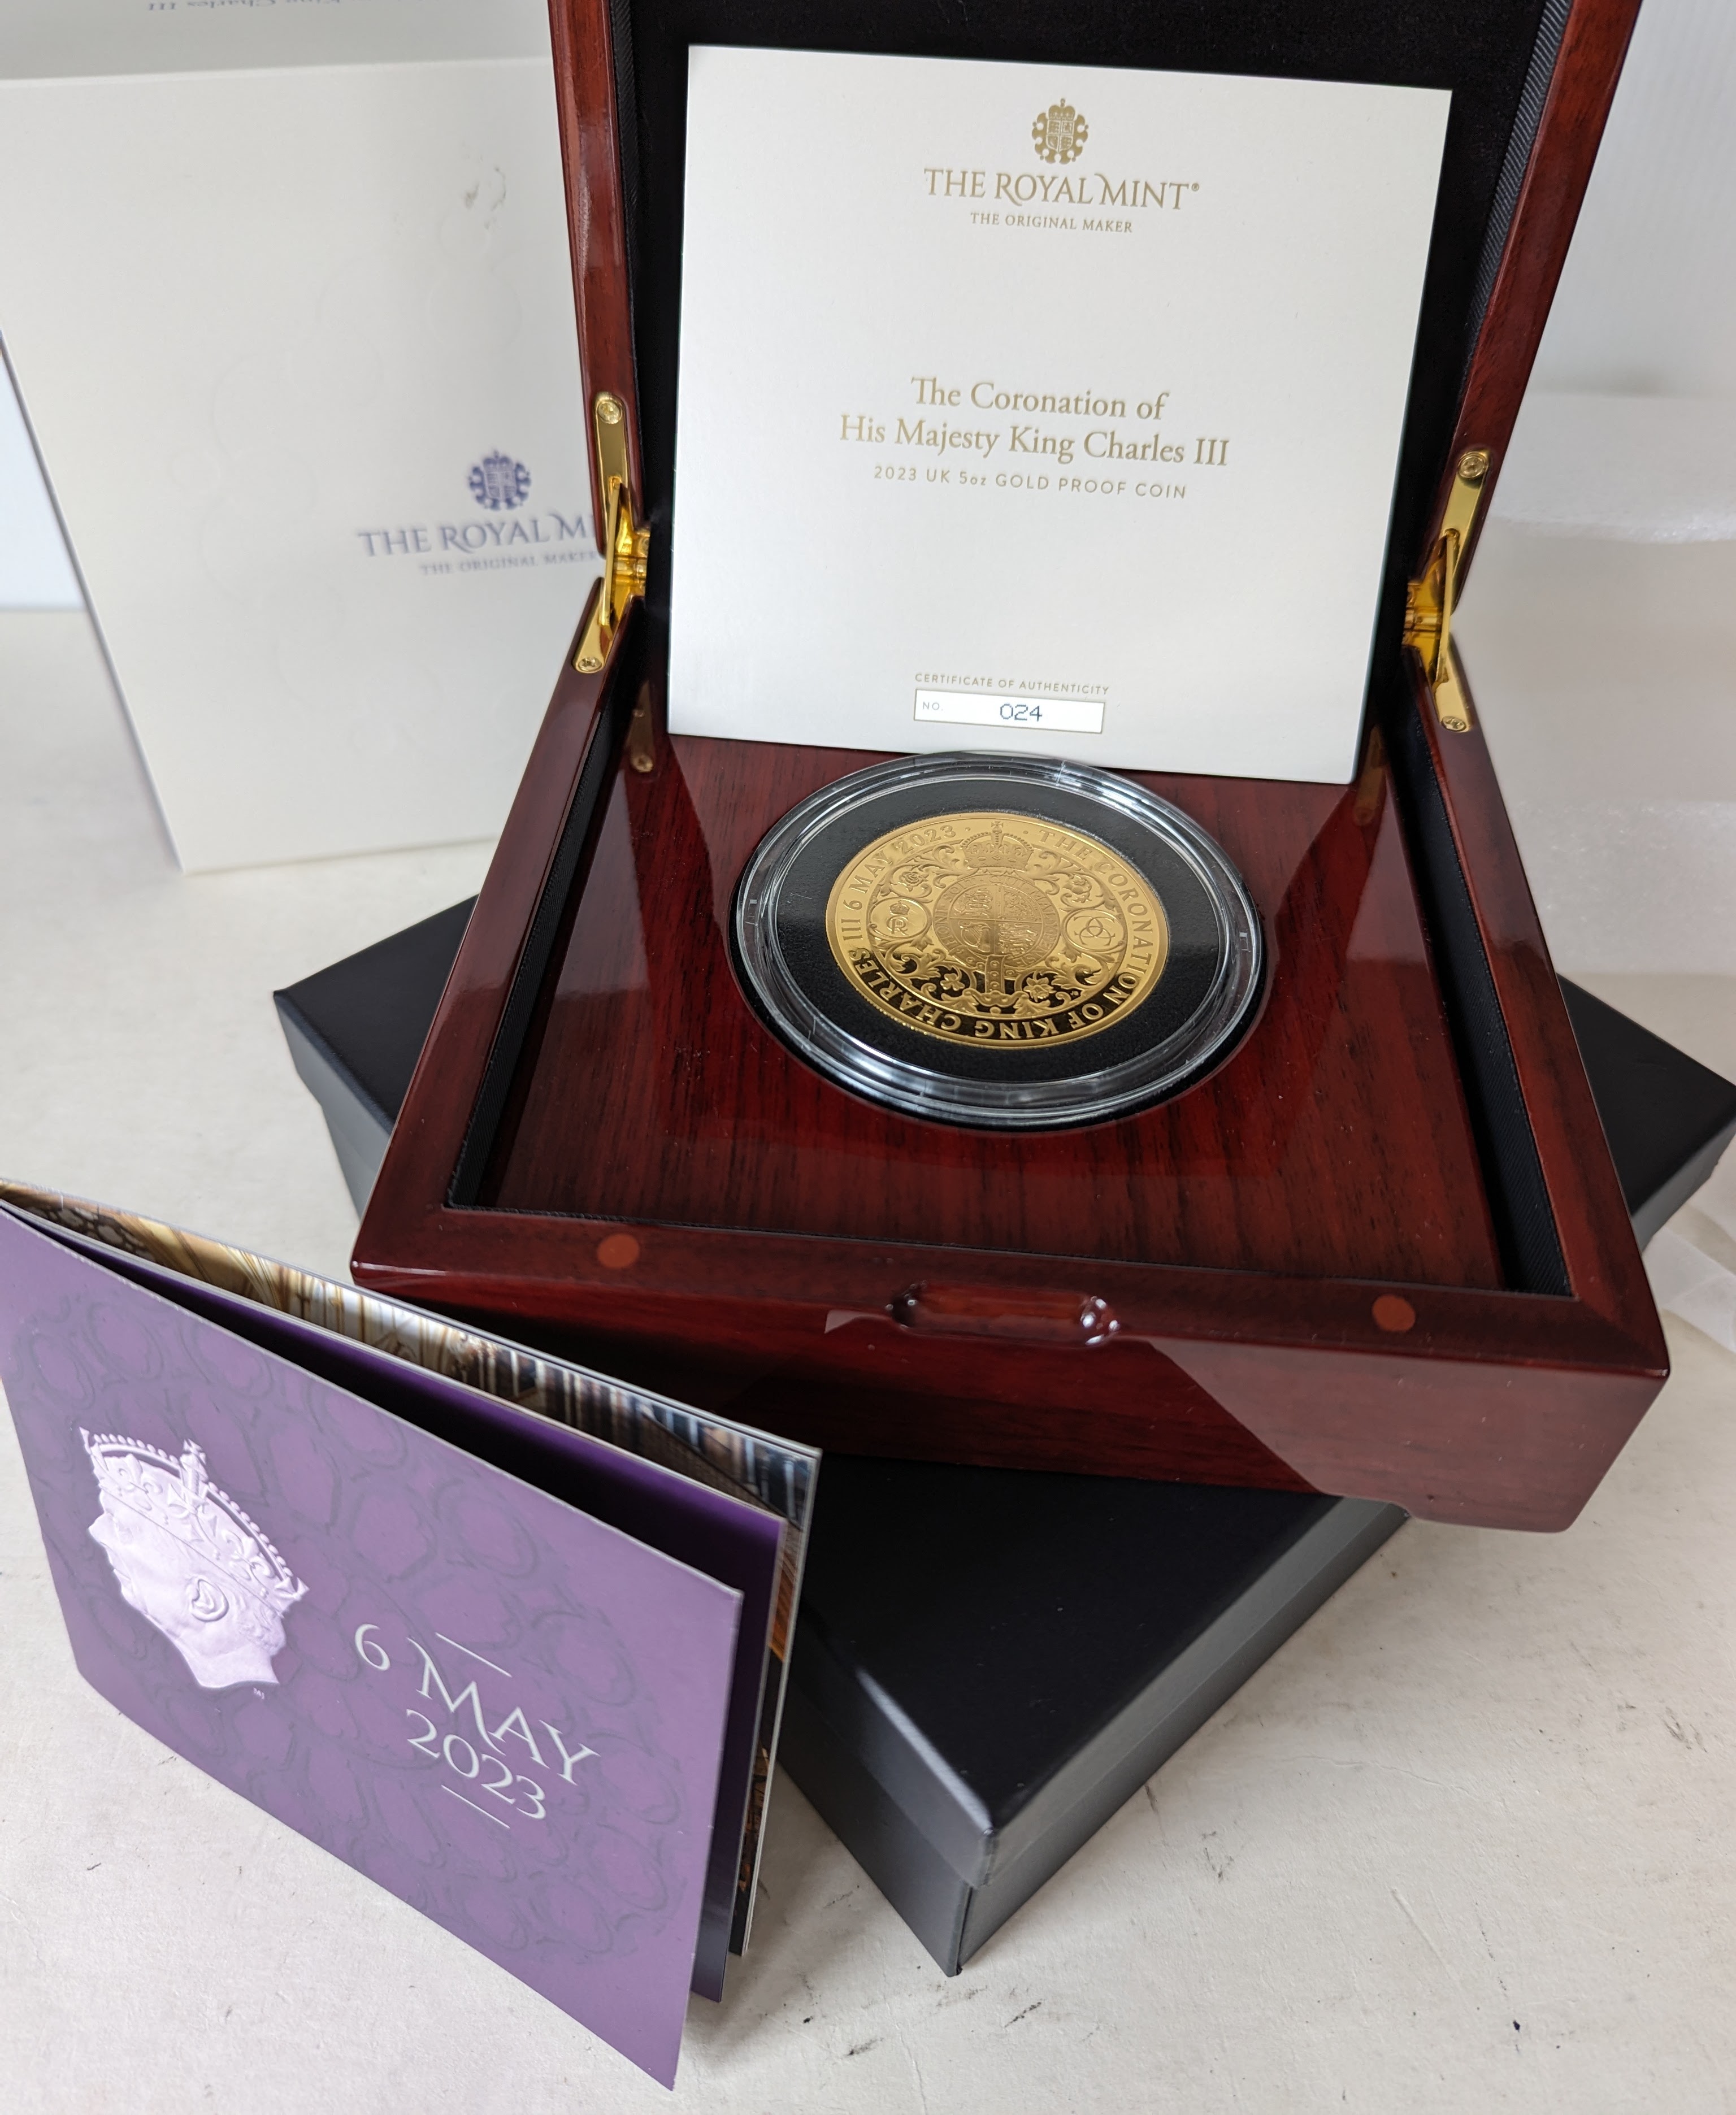 The Royal Mint Coronation of His Majesty King Charles III 2023 UK 5oz 999.9 Gold Proof Coin